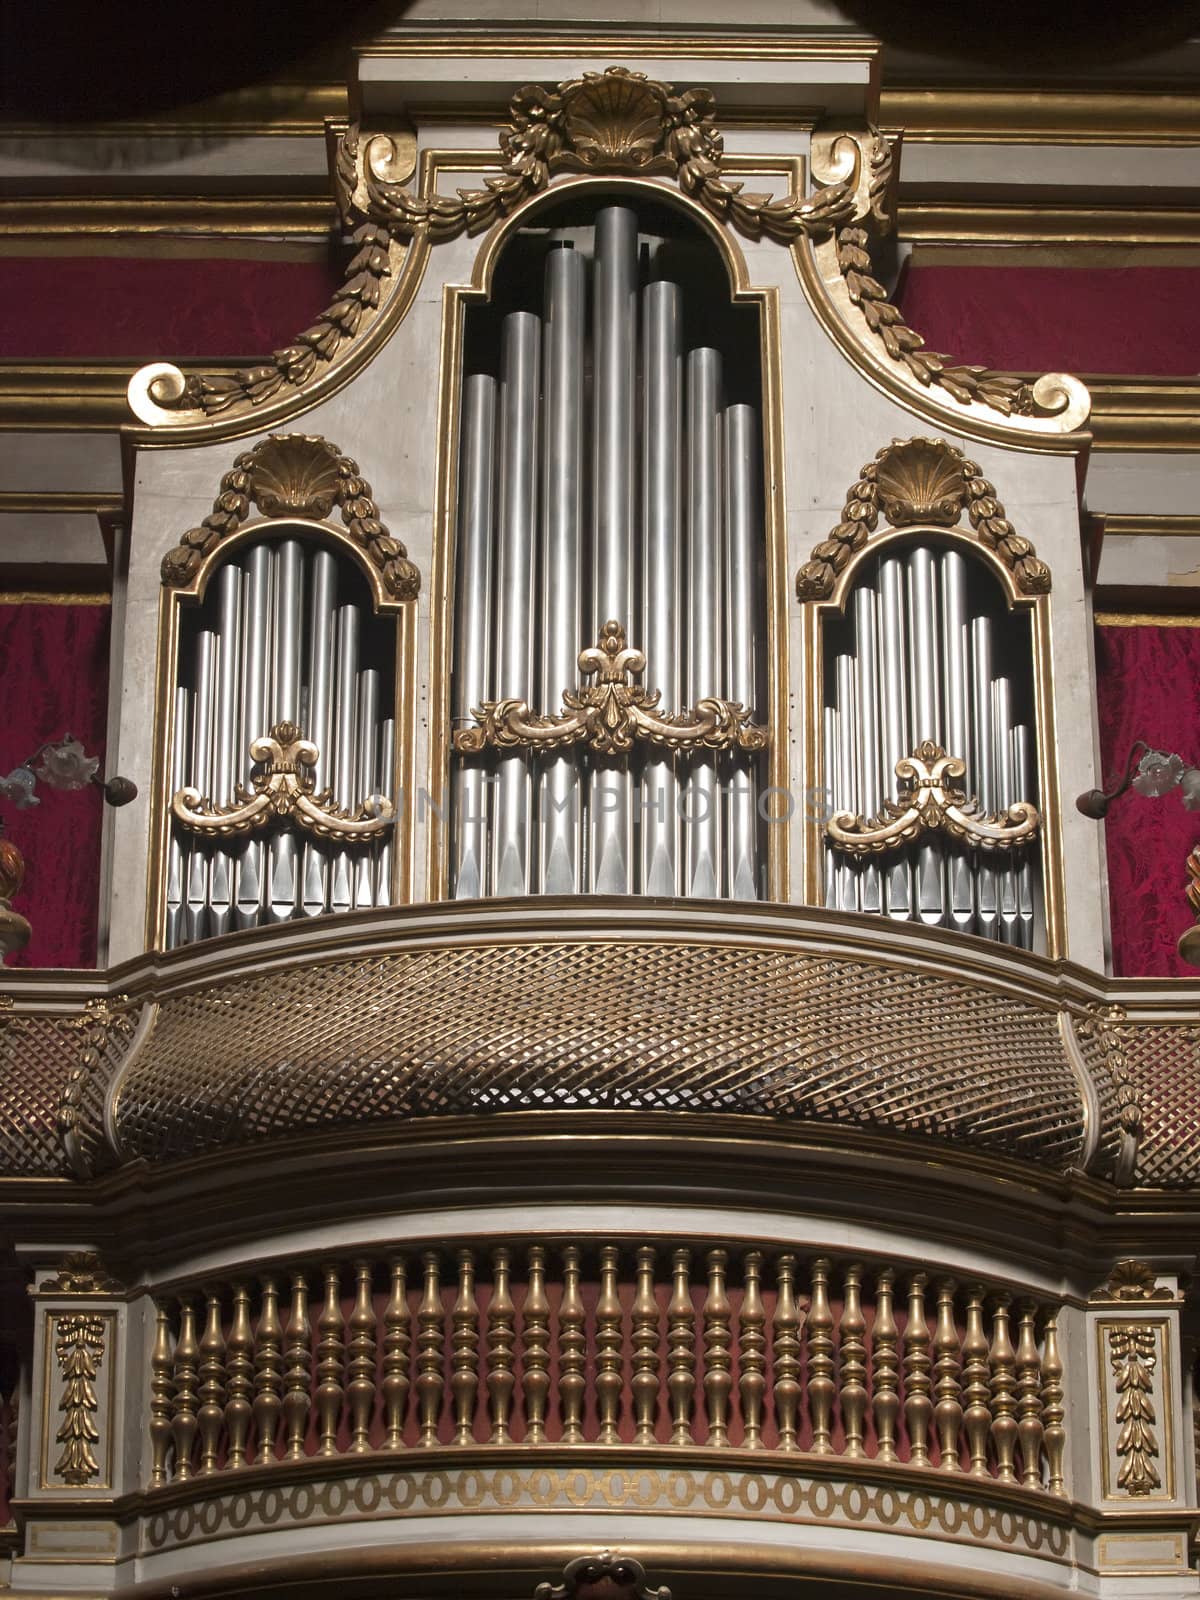 Church organ of the Cathedral of St. Paul in Mdina in Malta